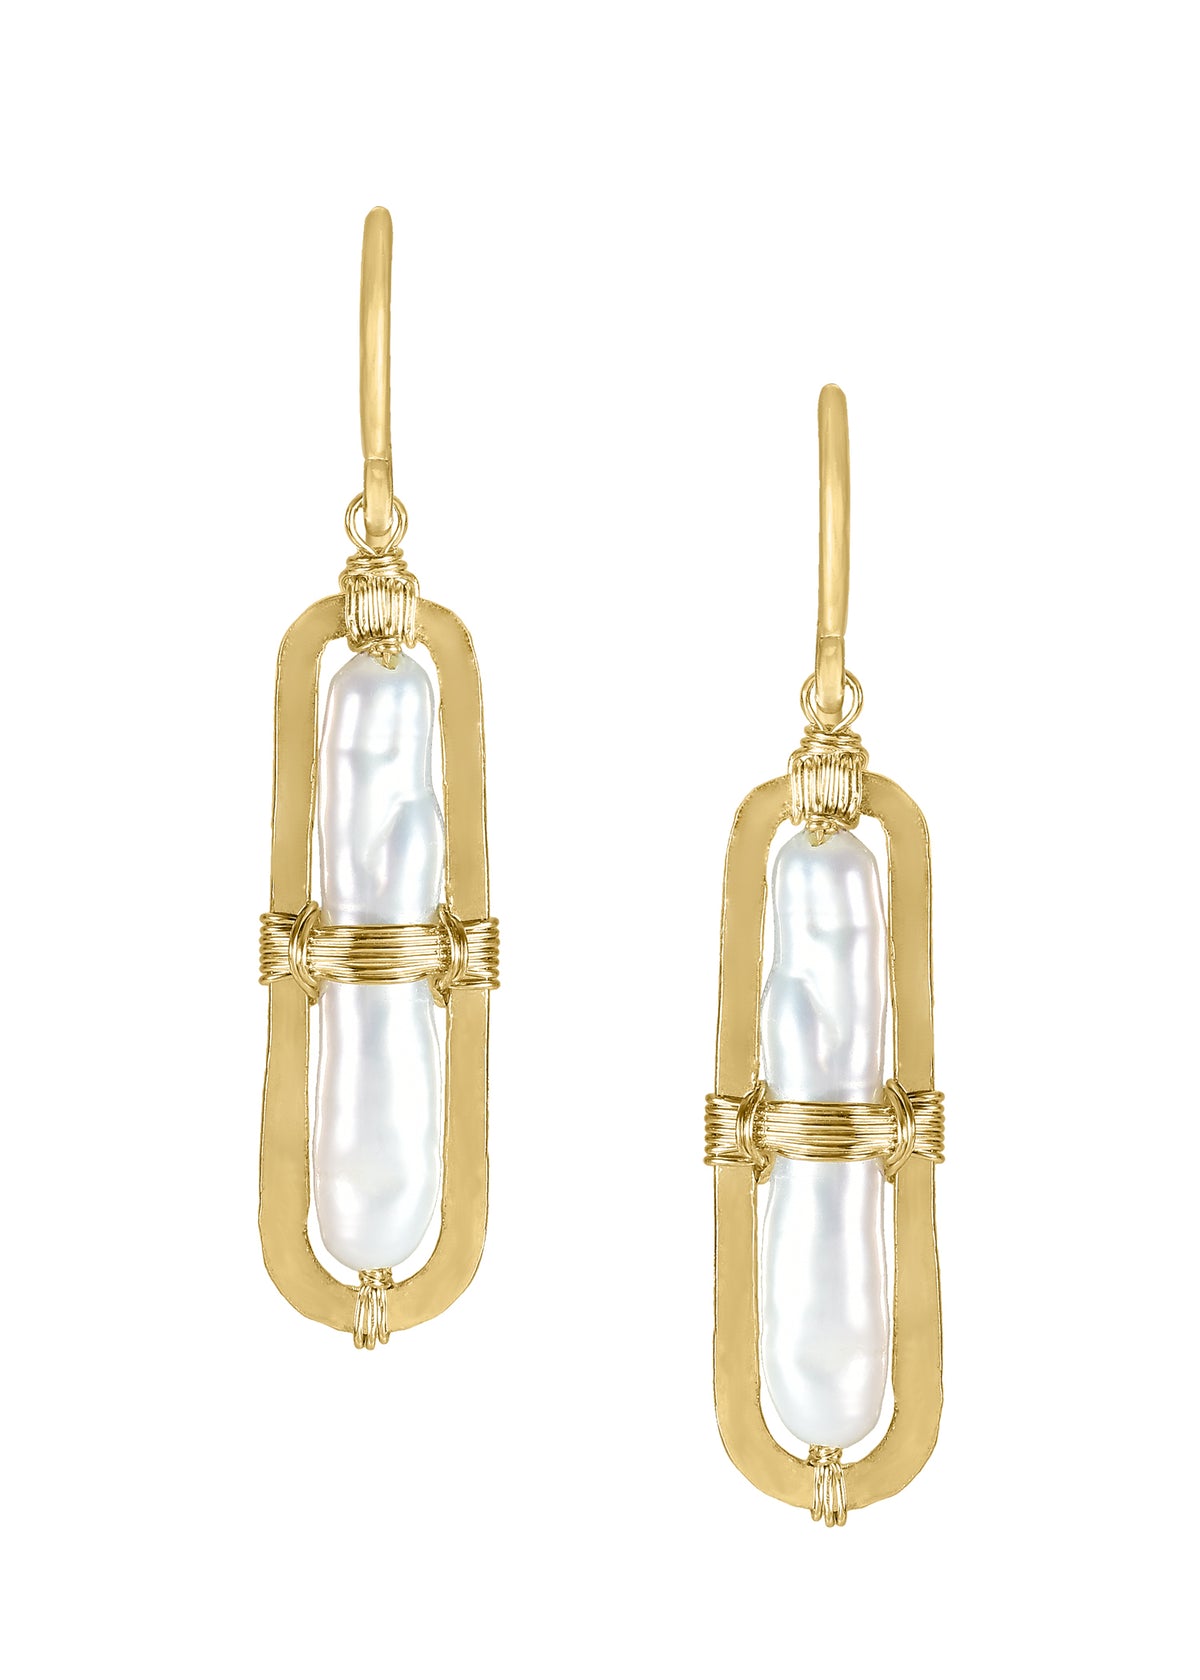 Freshwater pearl 14k gold fill Earrings measure 1-3/8&quot; in length (including the ear wires) and 5/16&quot; in width Handmade in our Los Angeles studio